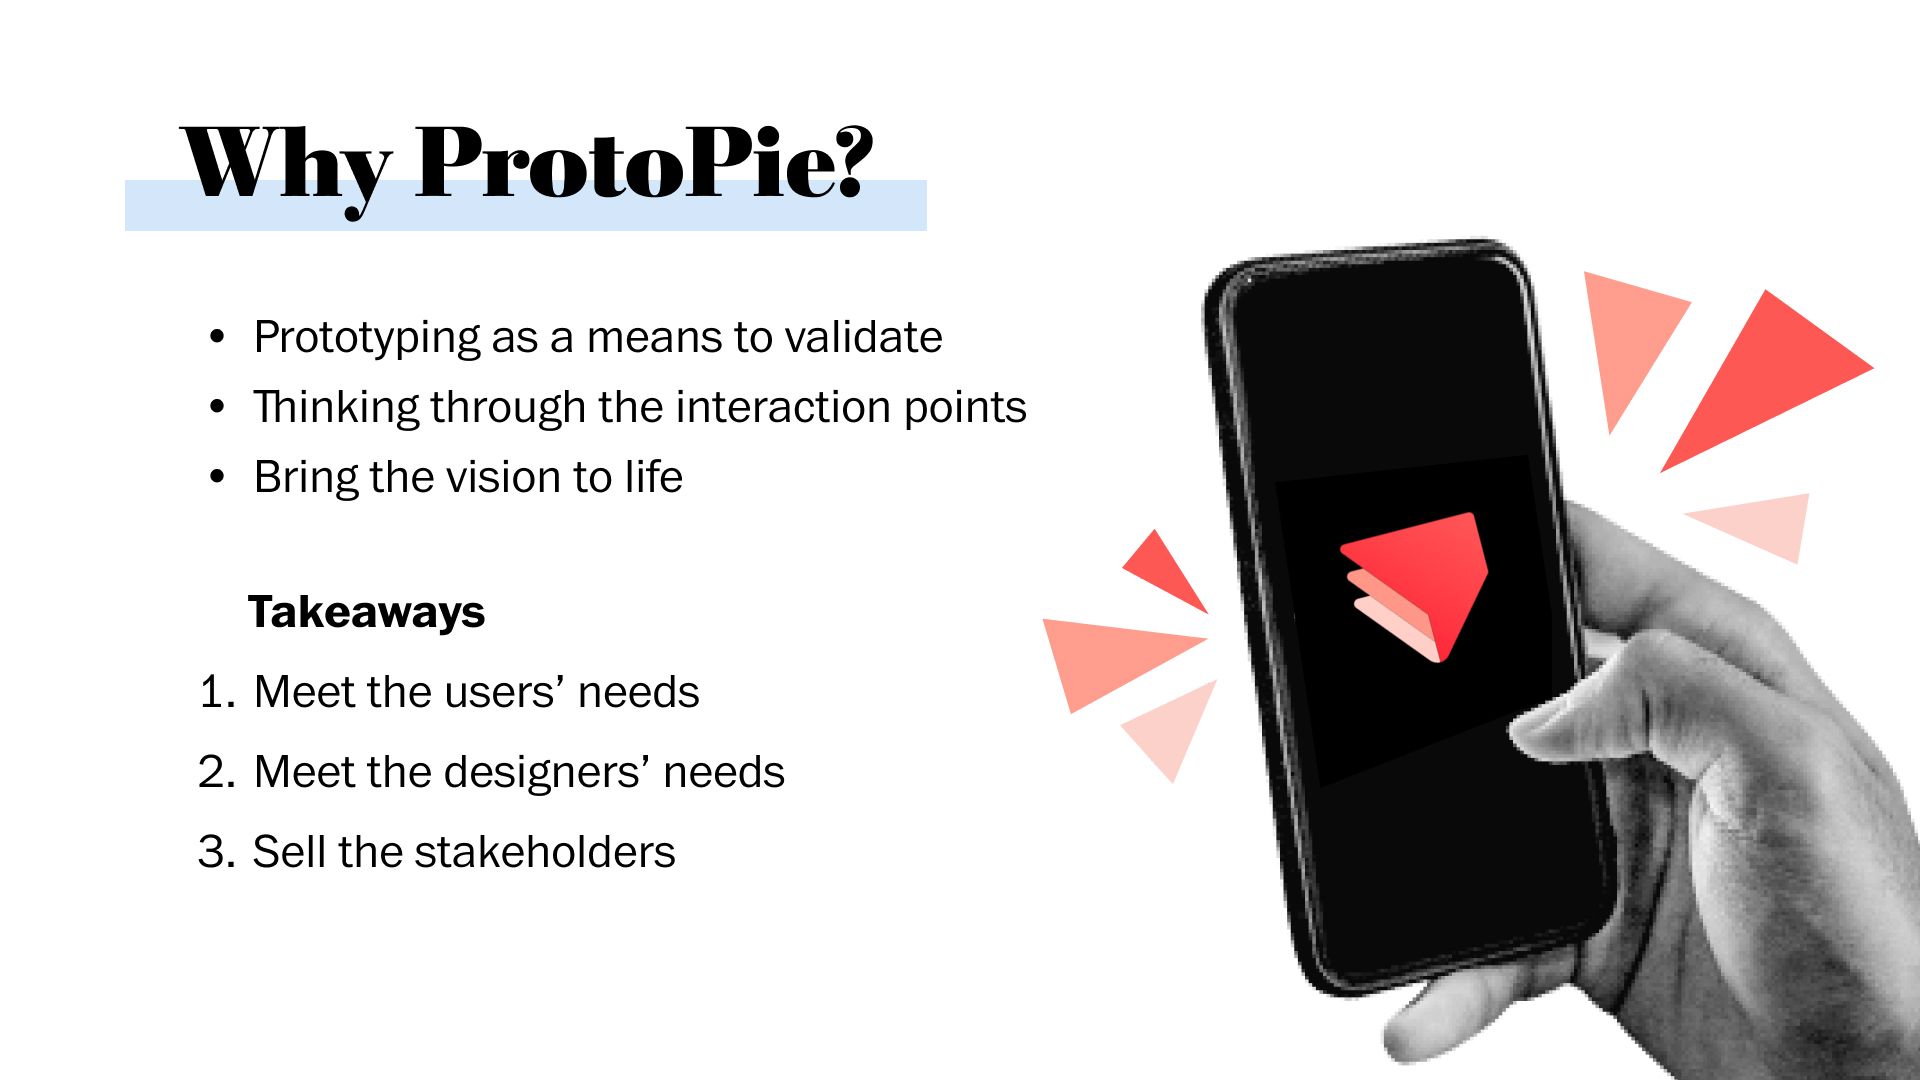 ProtoPie allowed designers at The Post to go beyond traditional prototyping boundaries.